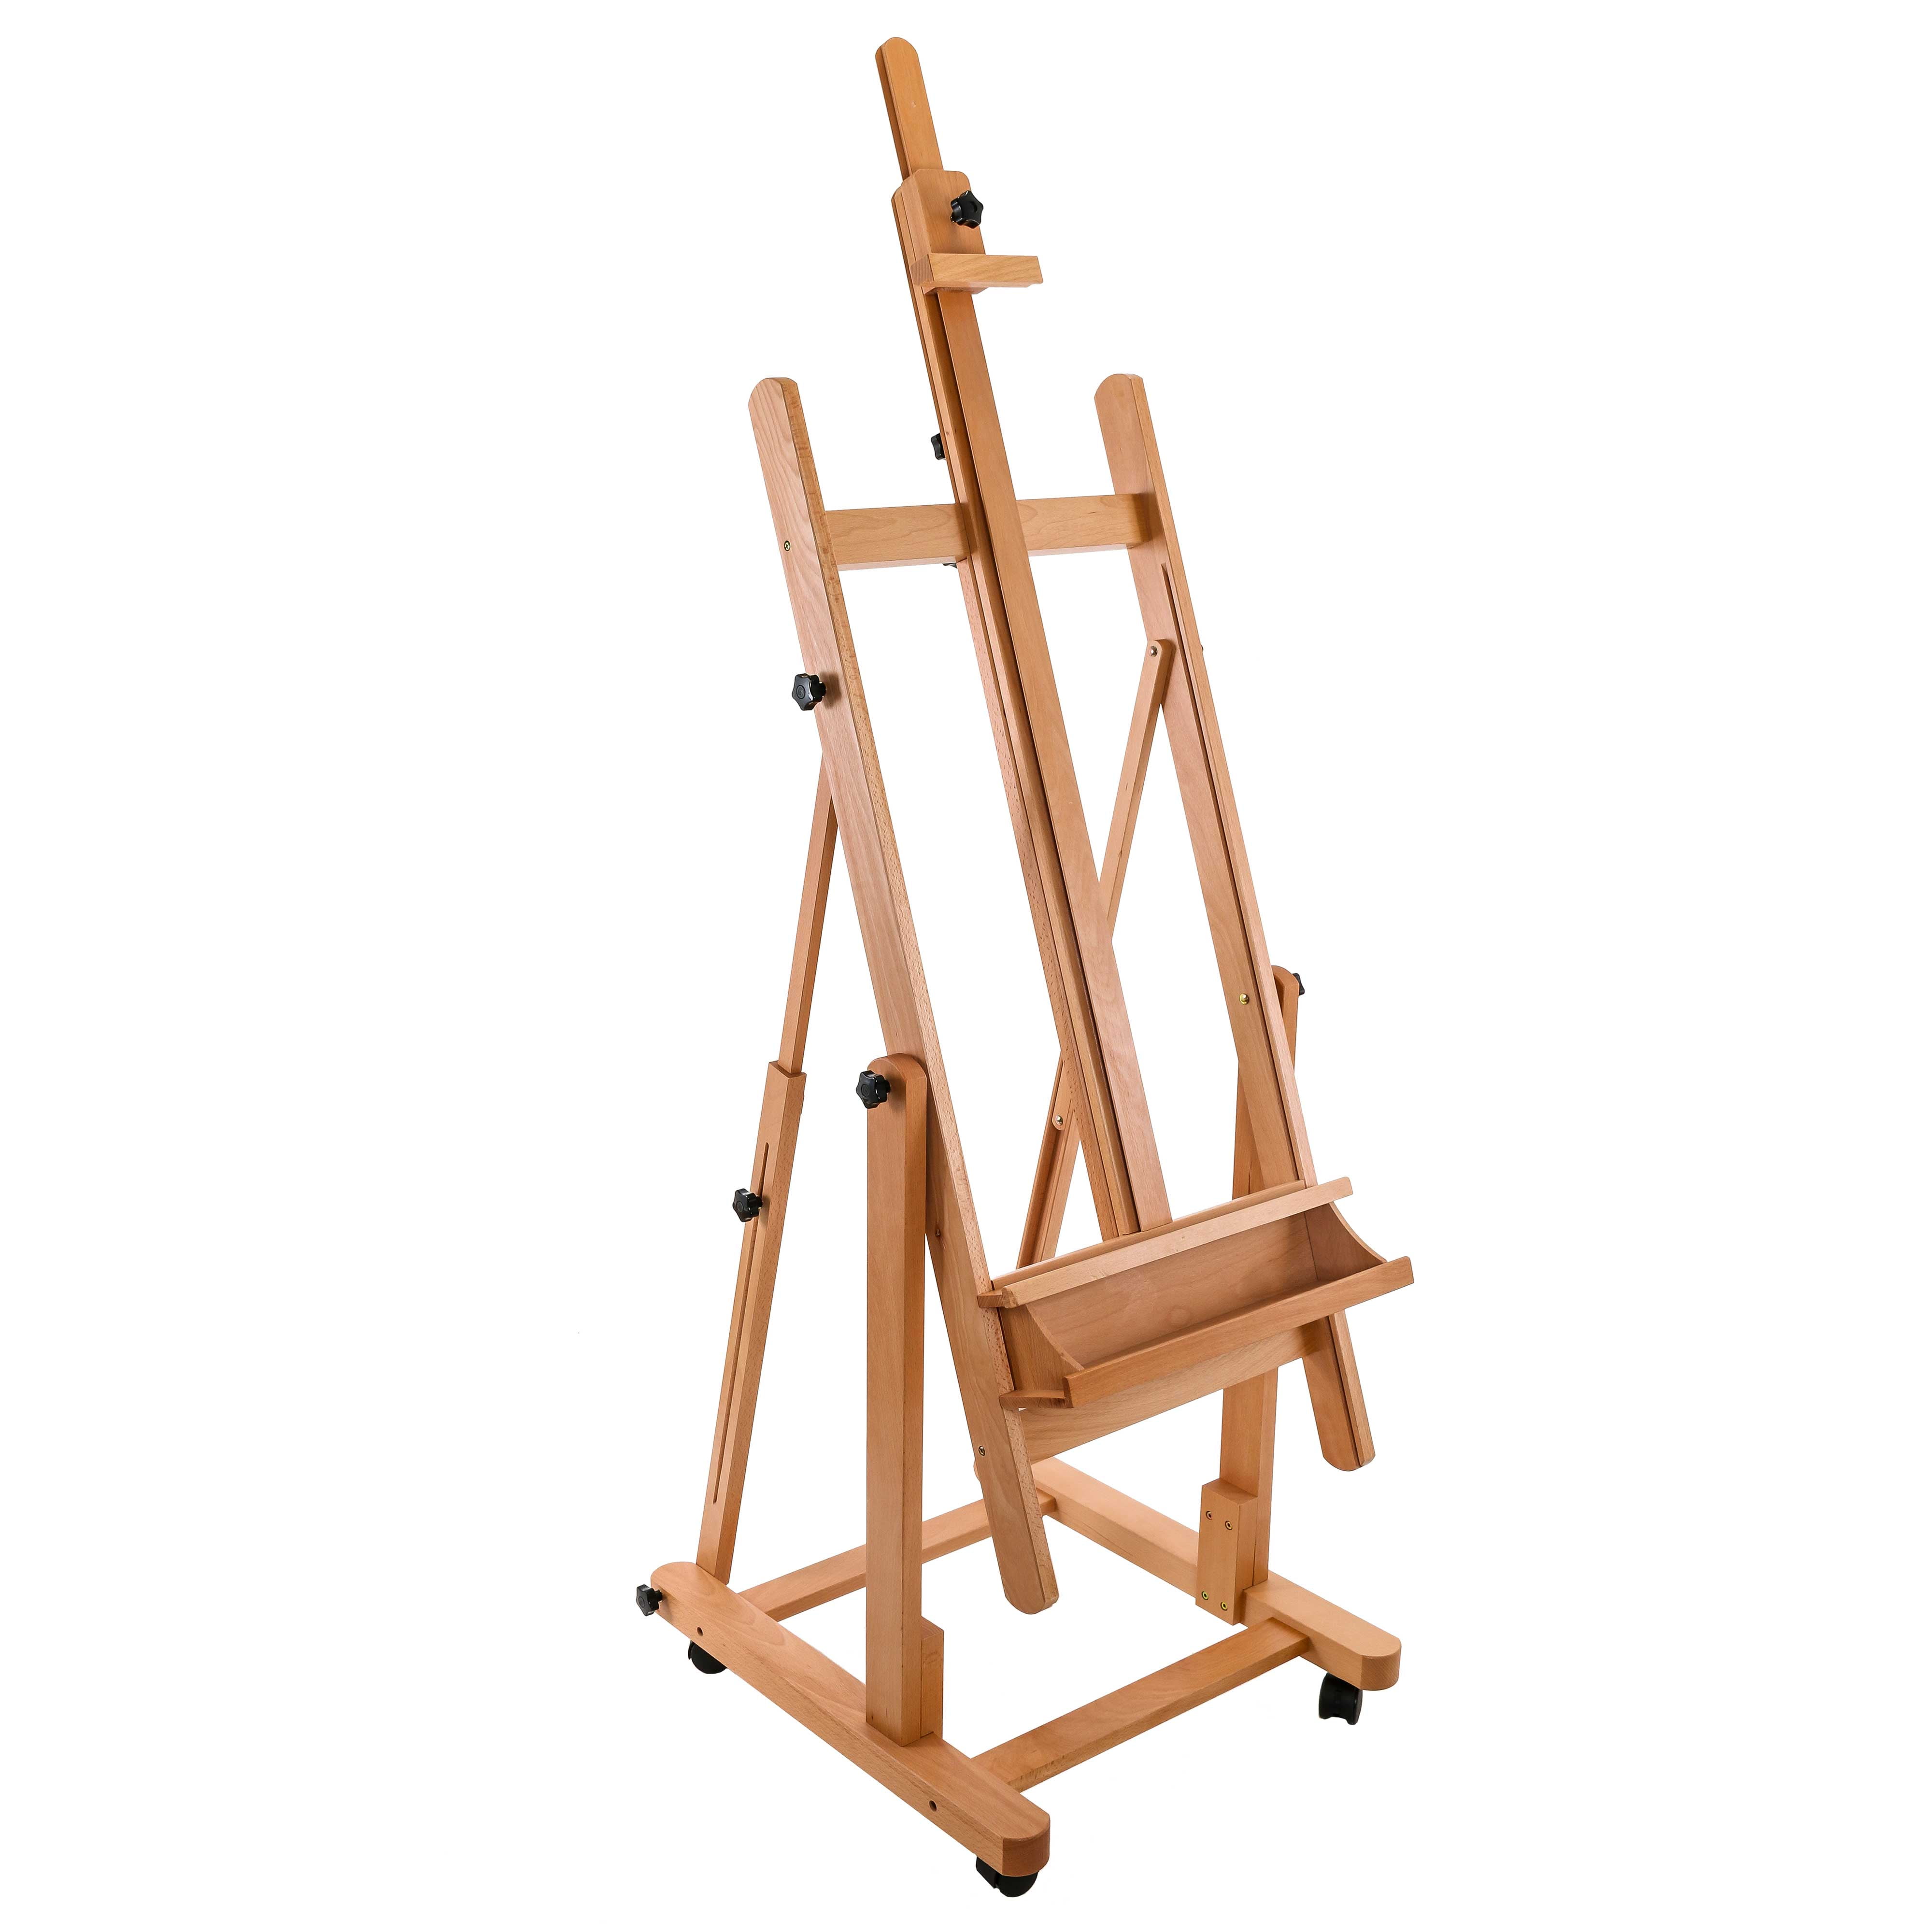 Somime A - Frame Wooden Display Easel with Wheels - Adjustable Lyre  Beechwood Studio Easel Stand Holding Canvas Up to 90, Inclinable Artist  Floor